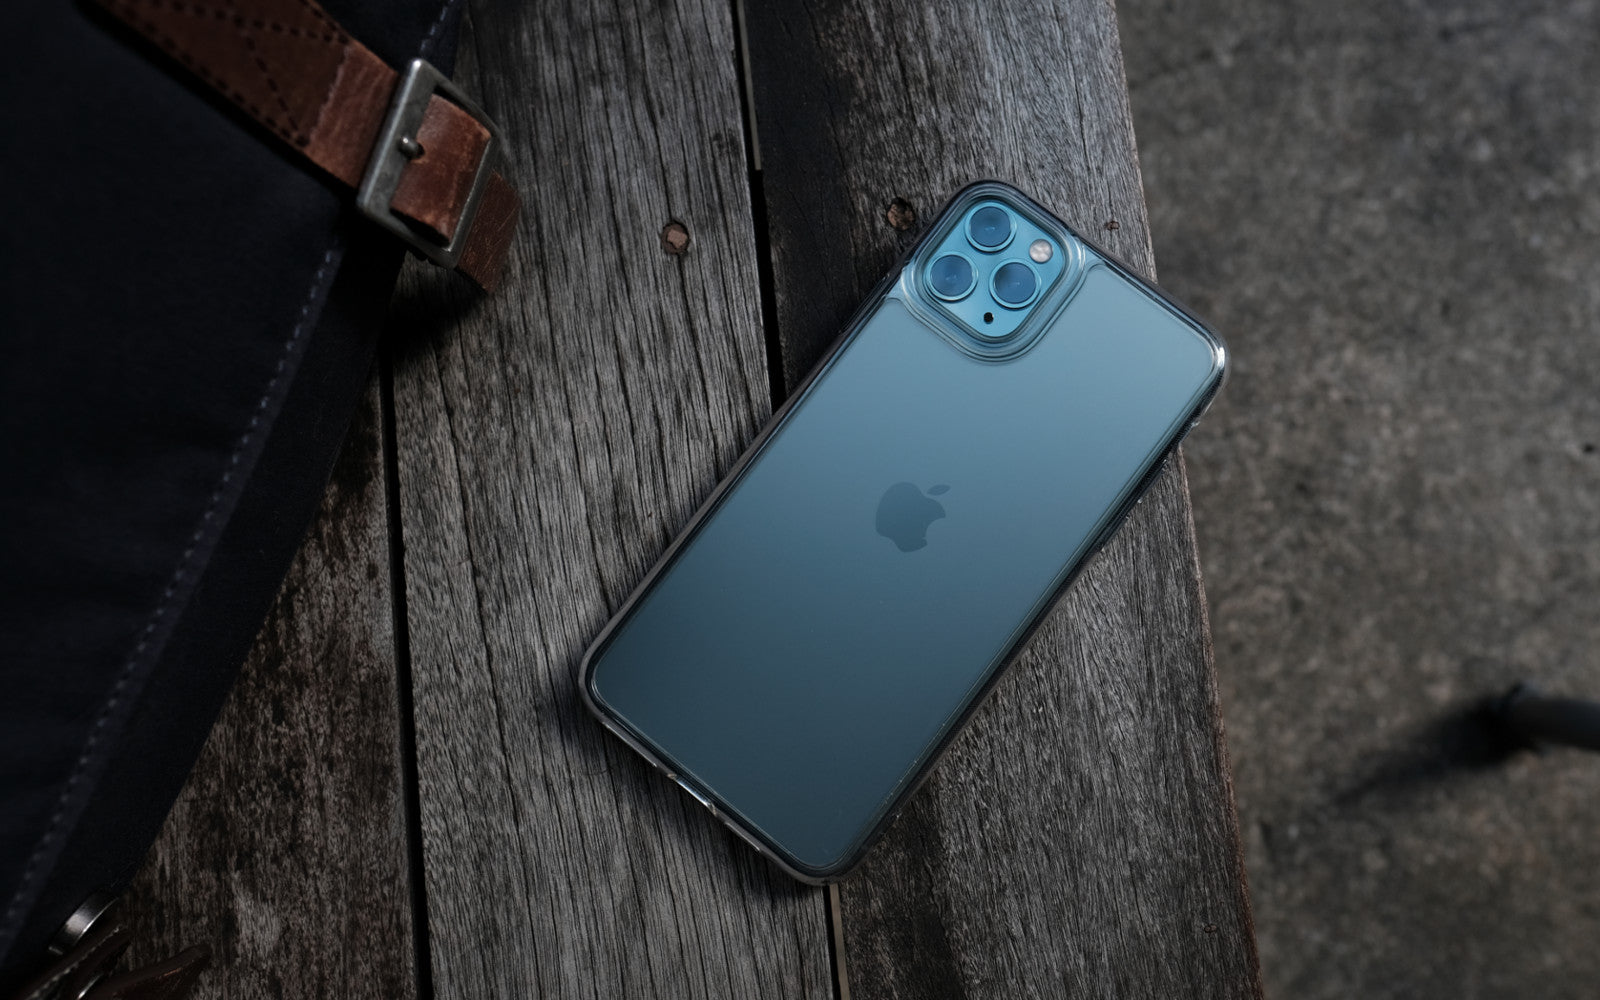 Bare Back Minimlist Shock Resistant Case with a Frosted Glass Back for iPhone 11 Pro and 11 Pro Max - Branding-Free